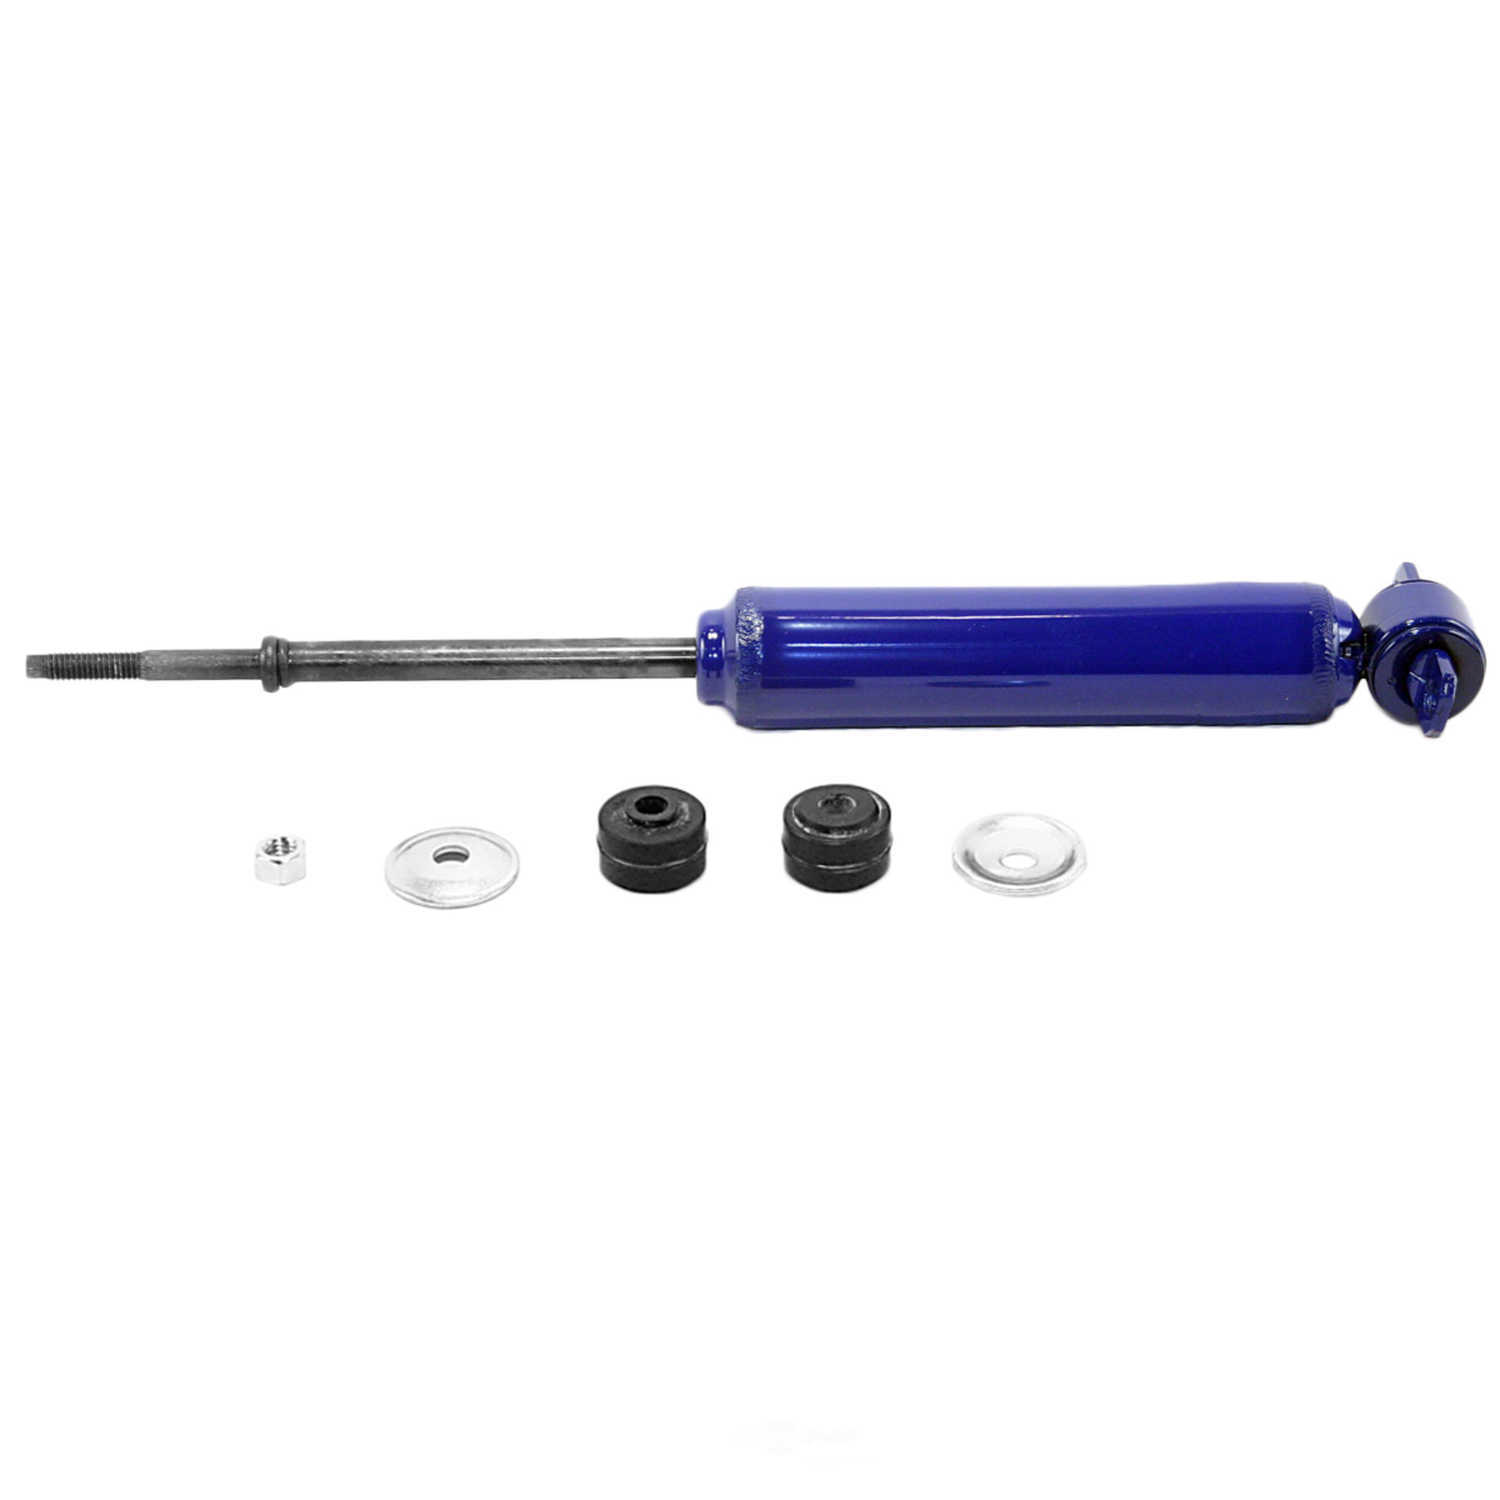 MONROE SHOCKS/STRUTS - Monro-Matic Plus Shock Absorber (With ABS Brakes, Front) - MOE 32066